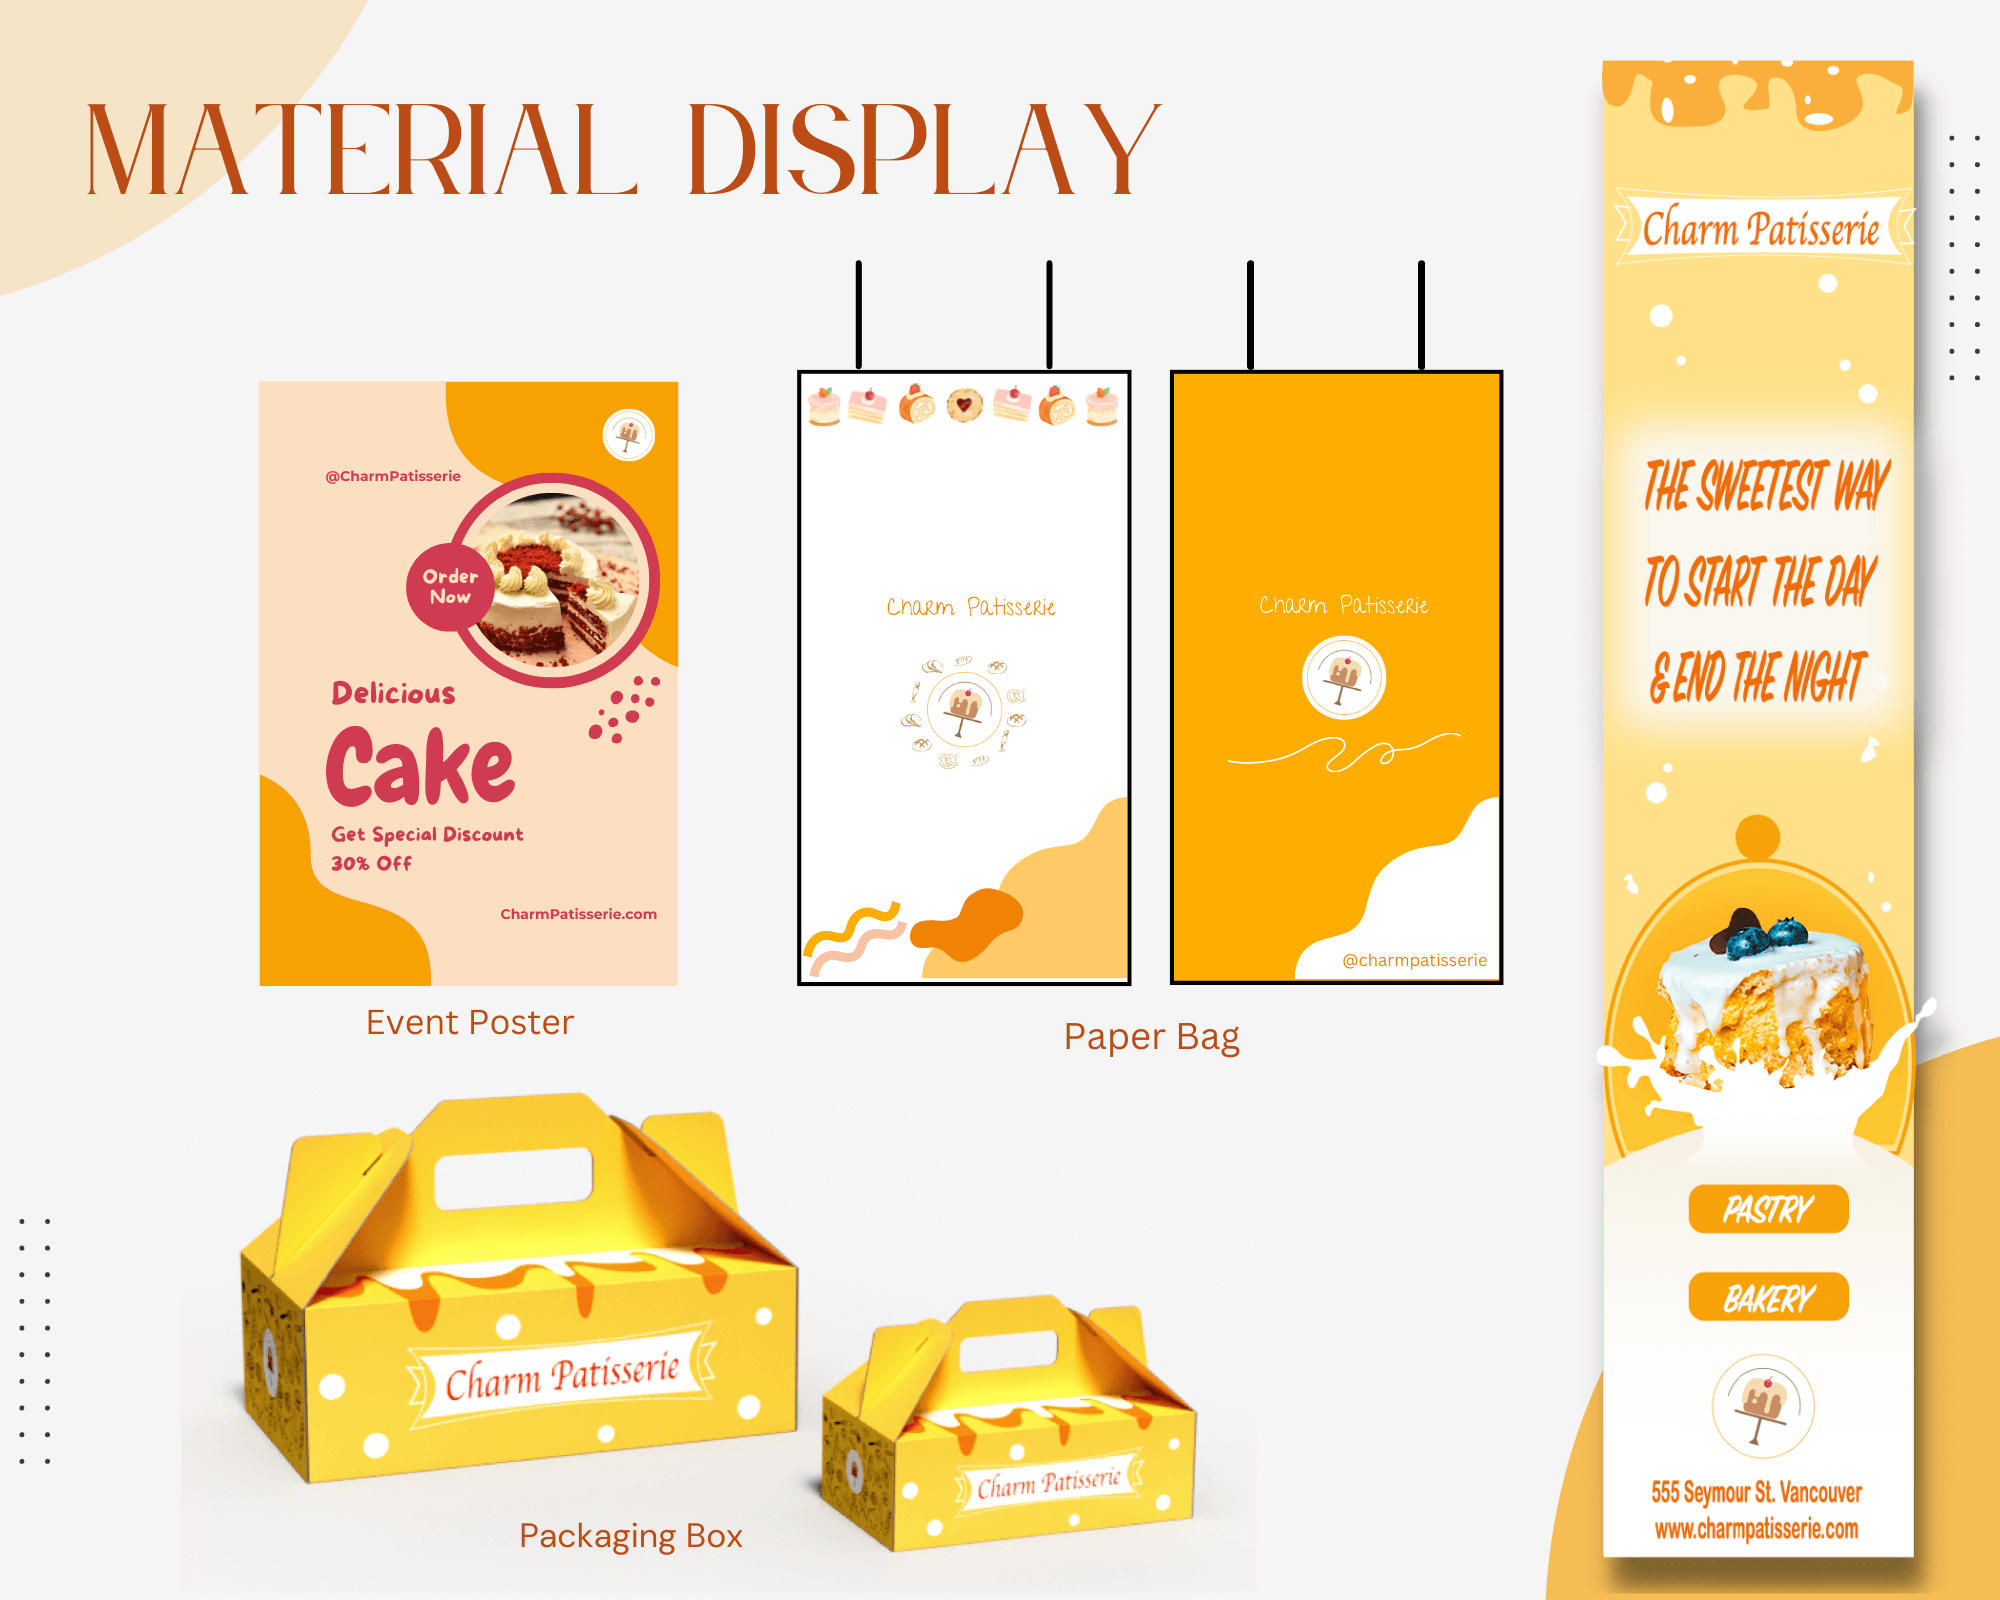 Charm Patisserie material designs